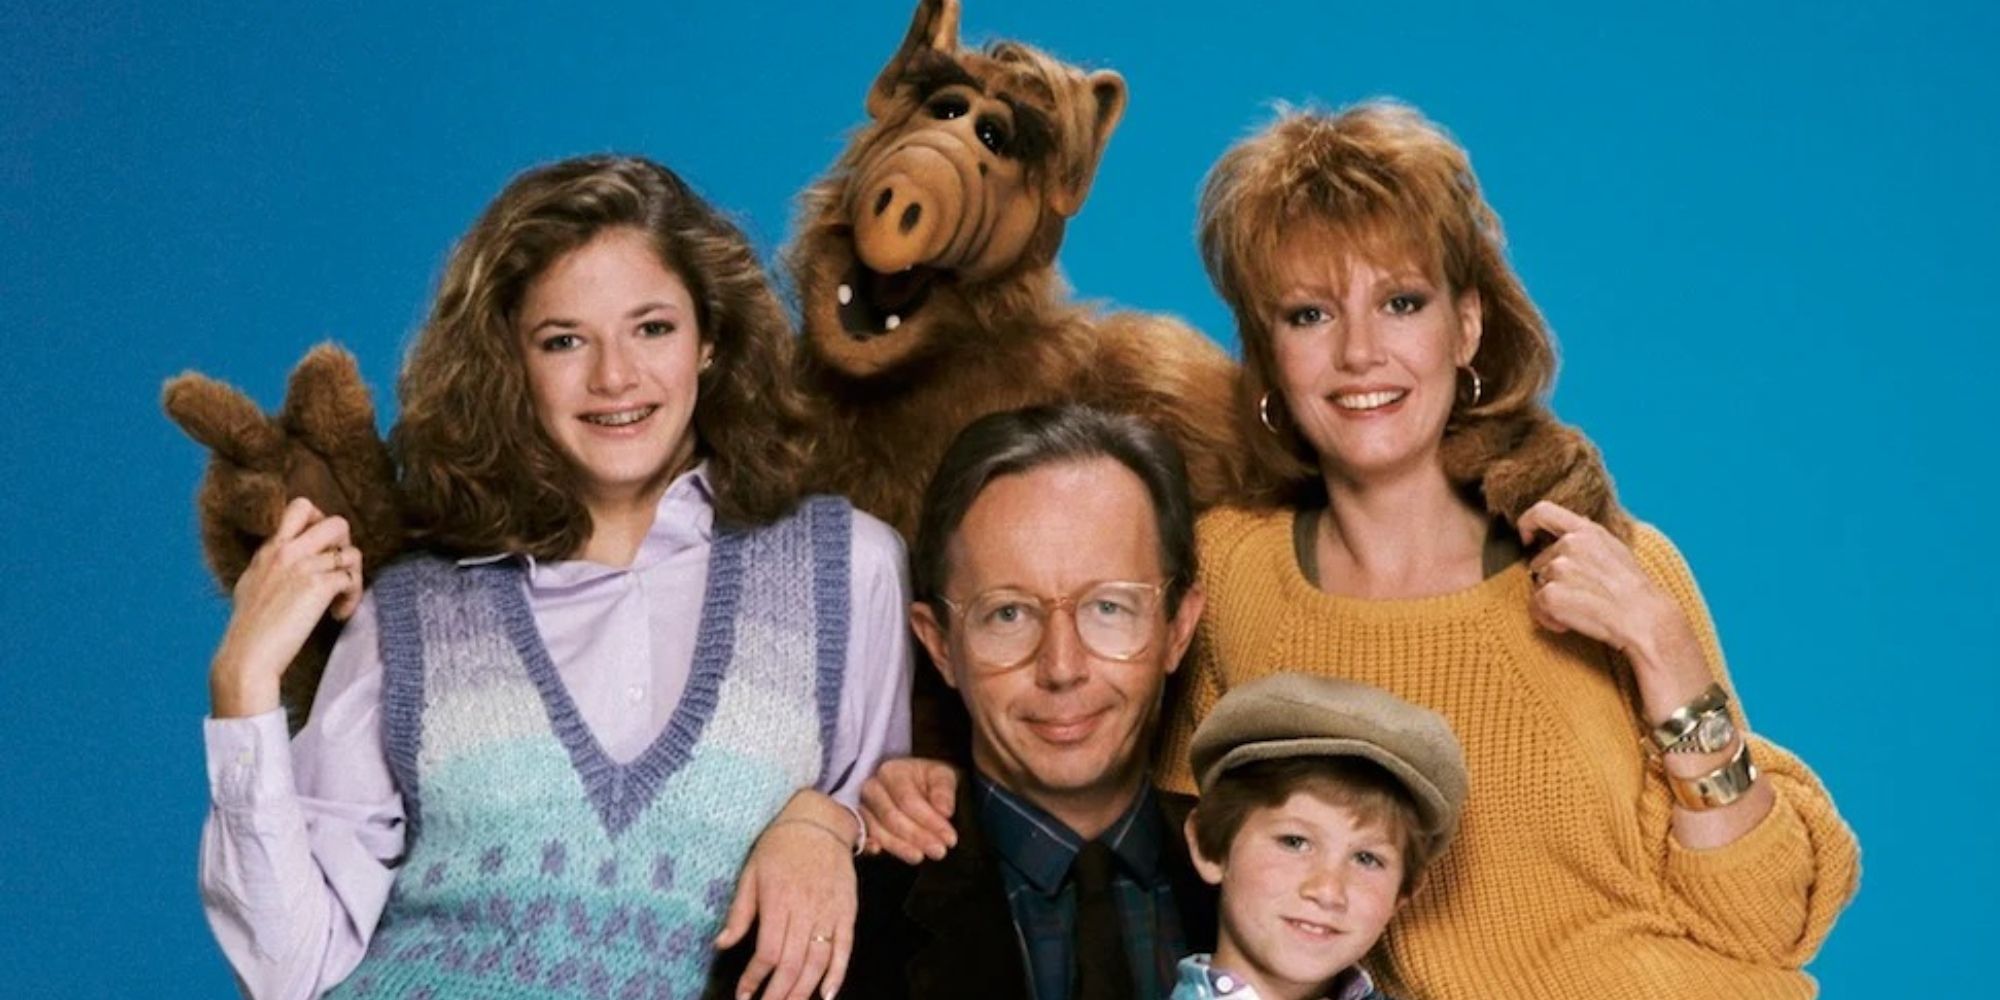 The cast of ALF